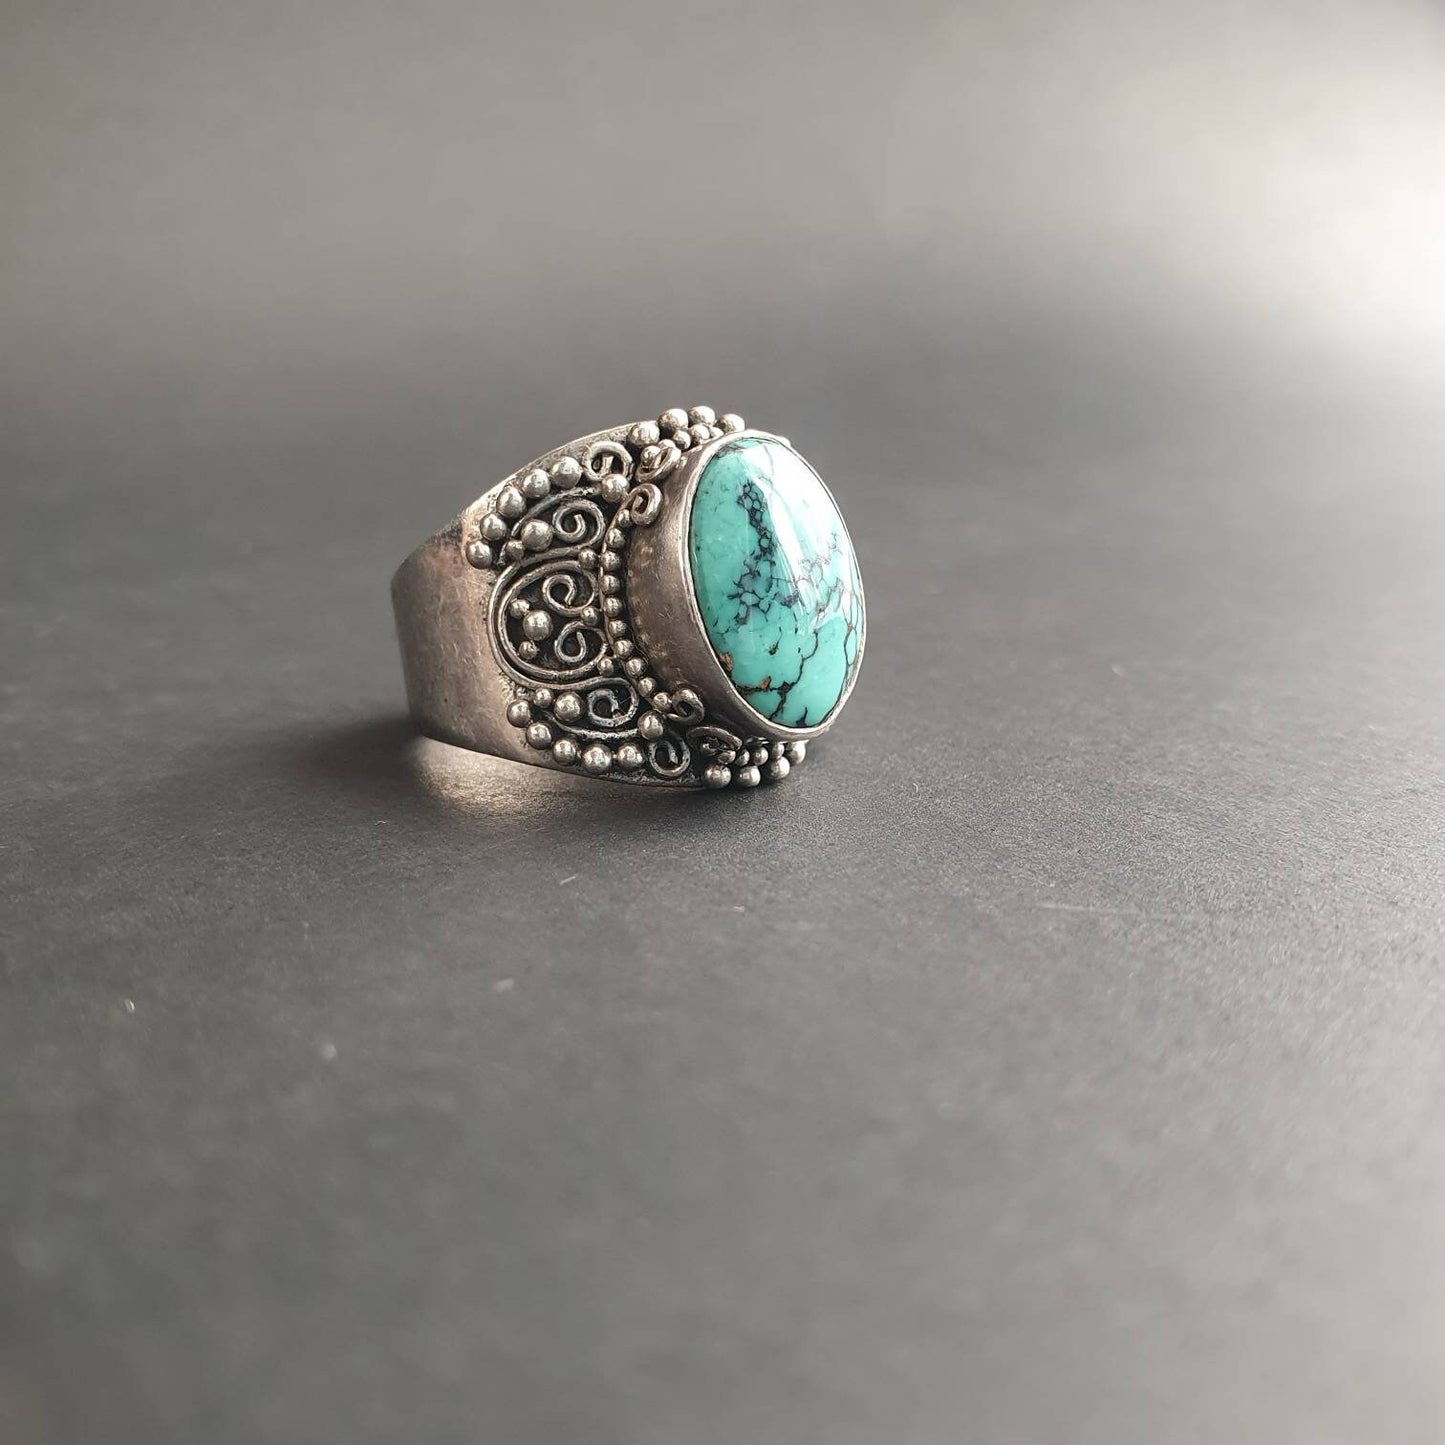 Ring - Vintage, Turquoise  Heavy gauge Sterling Silver,Tibetan Nepalese antique oval turquoise ring unisex gifts fine filigree work 999